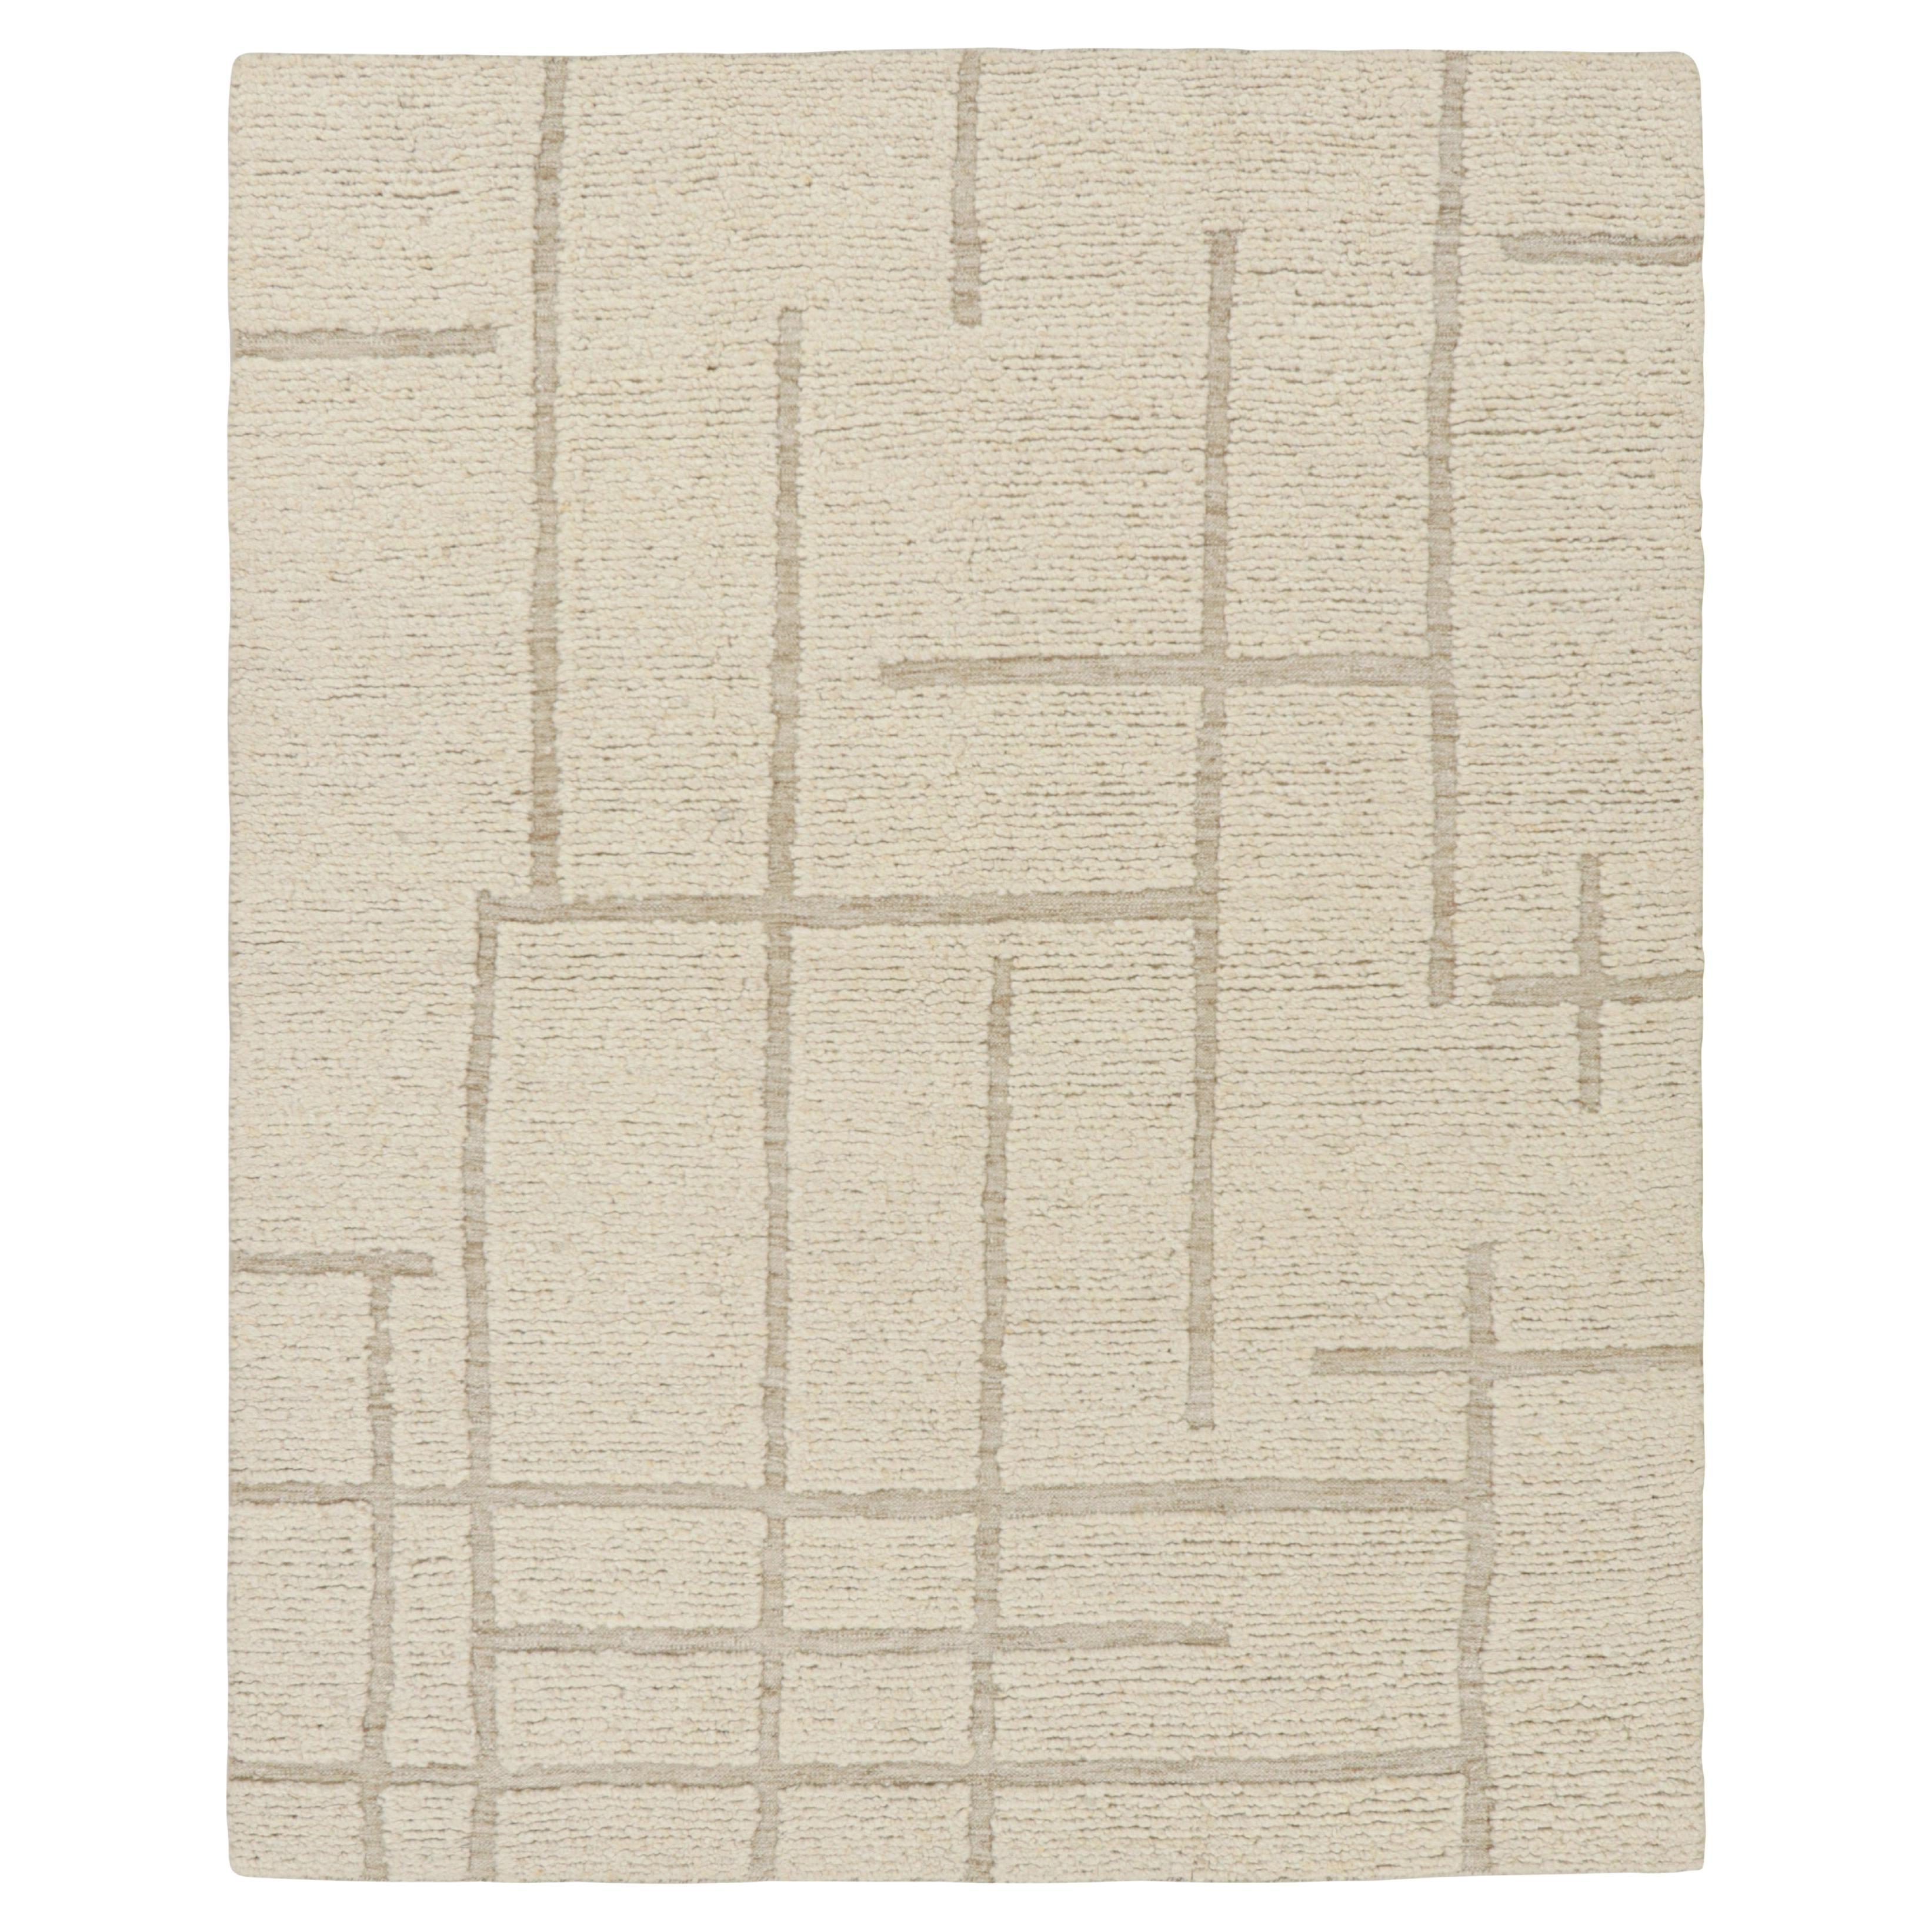 Rug & Kilim’s Modern Rug with Cream High-Low Geometric Patterns For Sale